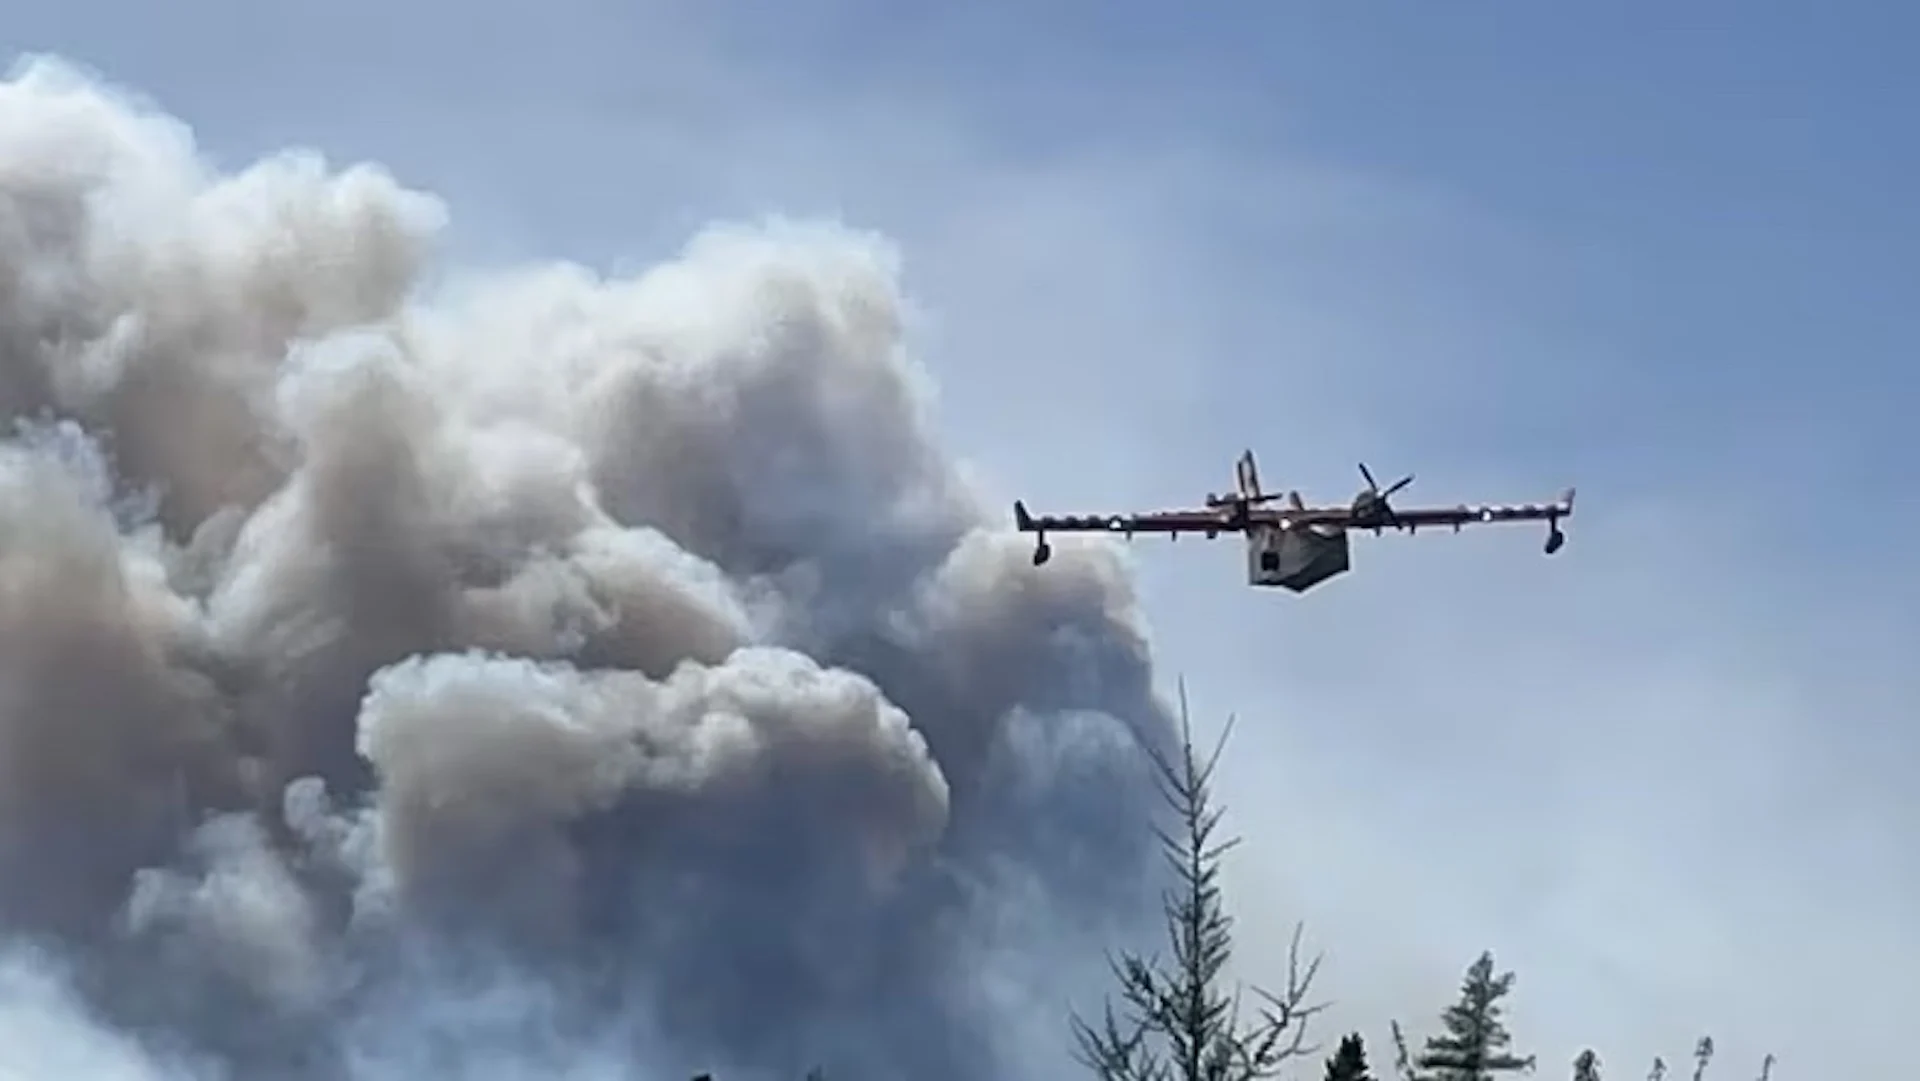 an-aircraft-flies-over-the-wildfire-in-shelburne-county/David Rockwood/Department of Natural Resources and Renewables via CBC